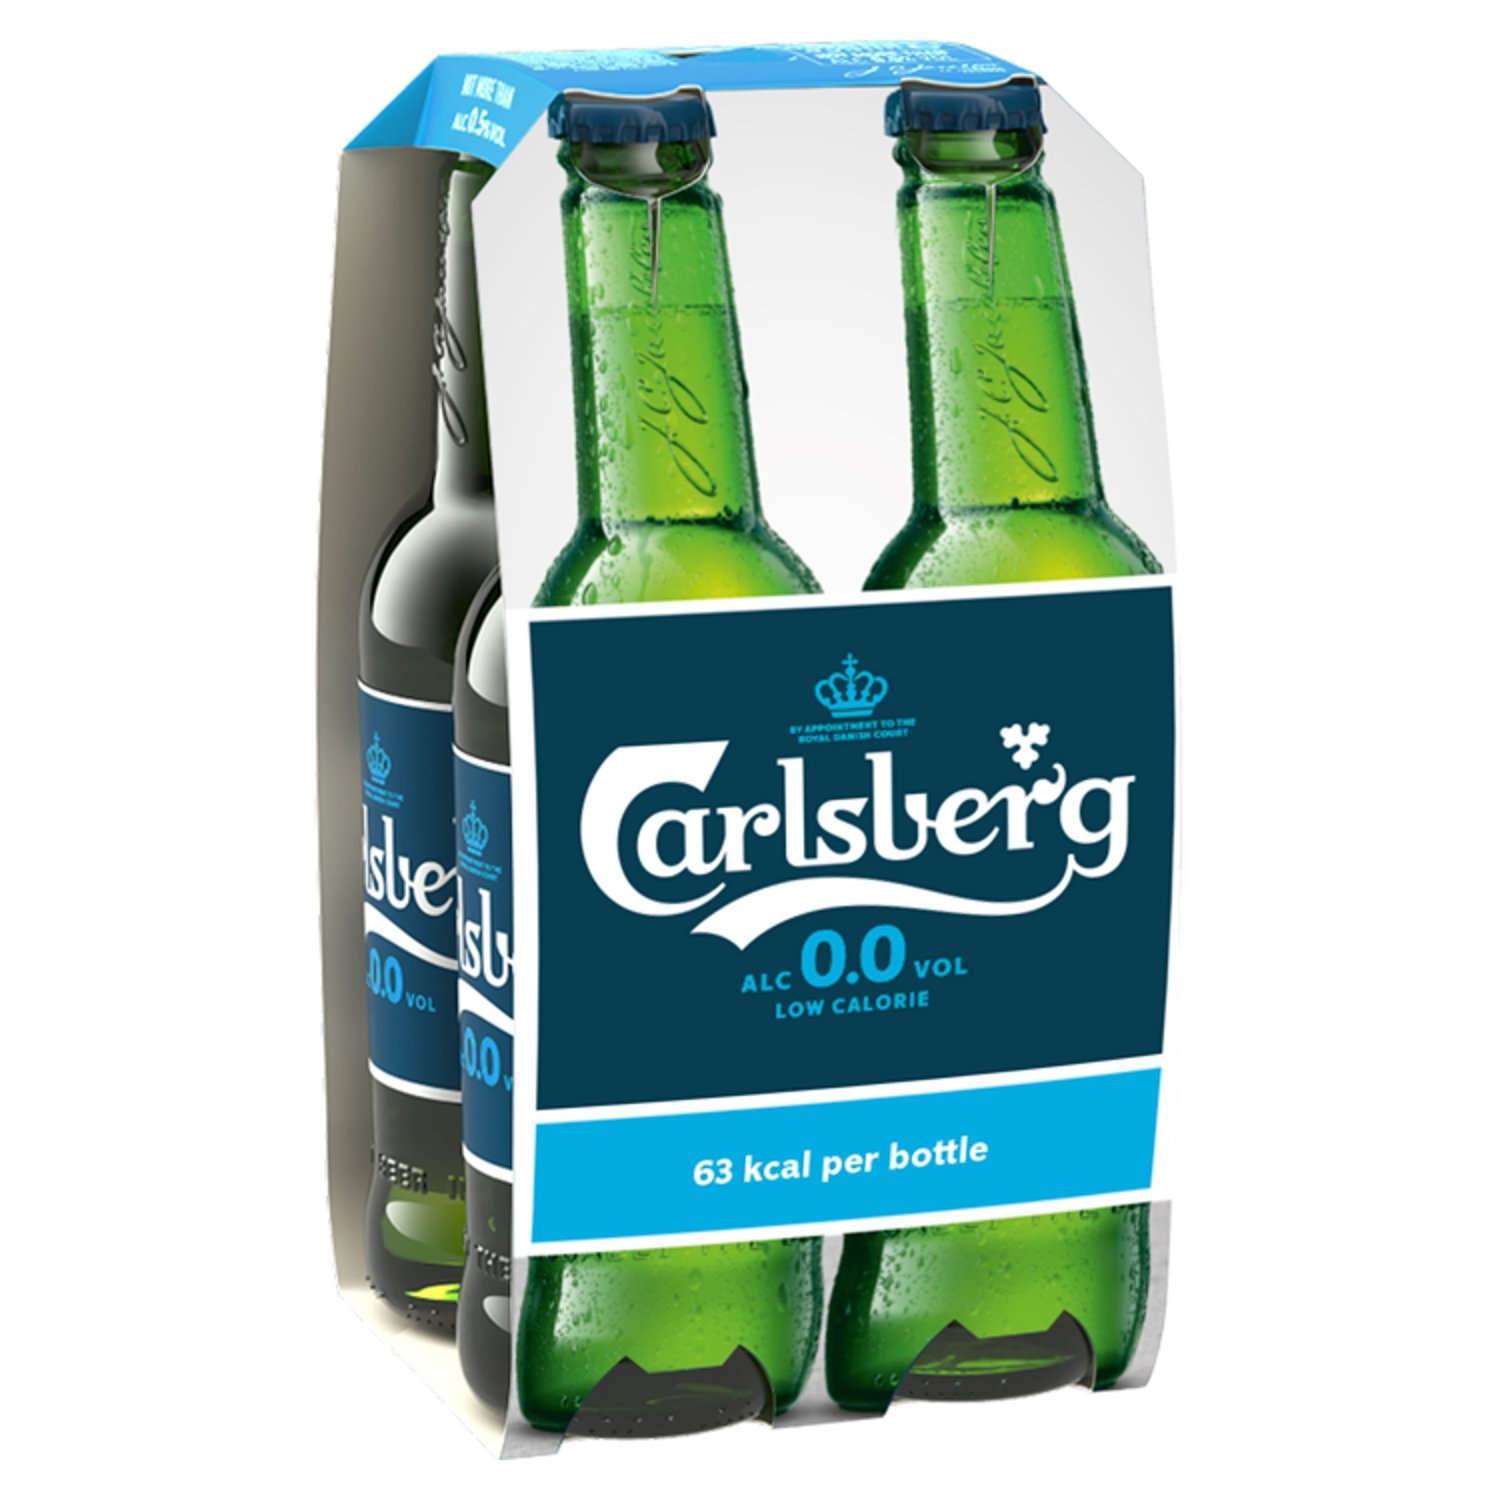 Refreshing with a crisp hoppy bite, Carlsberg Alcohol Free Pilsner is everything you’d expect from a well-balanced Pilsner…. just crafted to contain zero alcohol. So can you now enjoy great-tasting beer any time? Probably. 